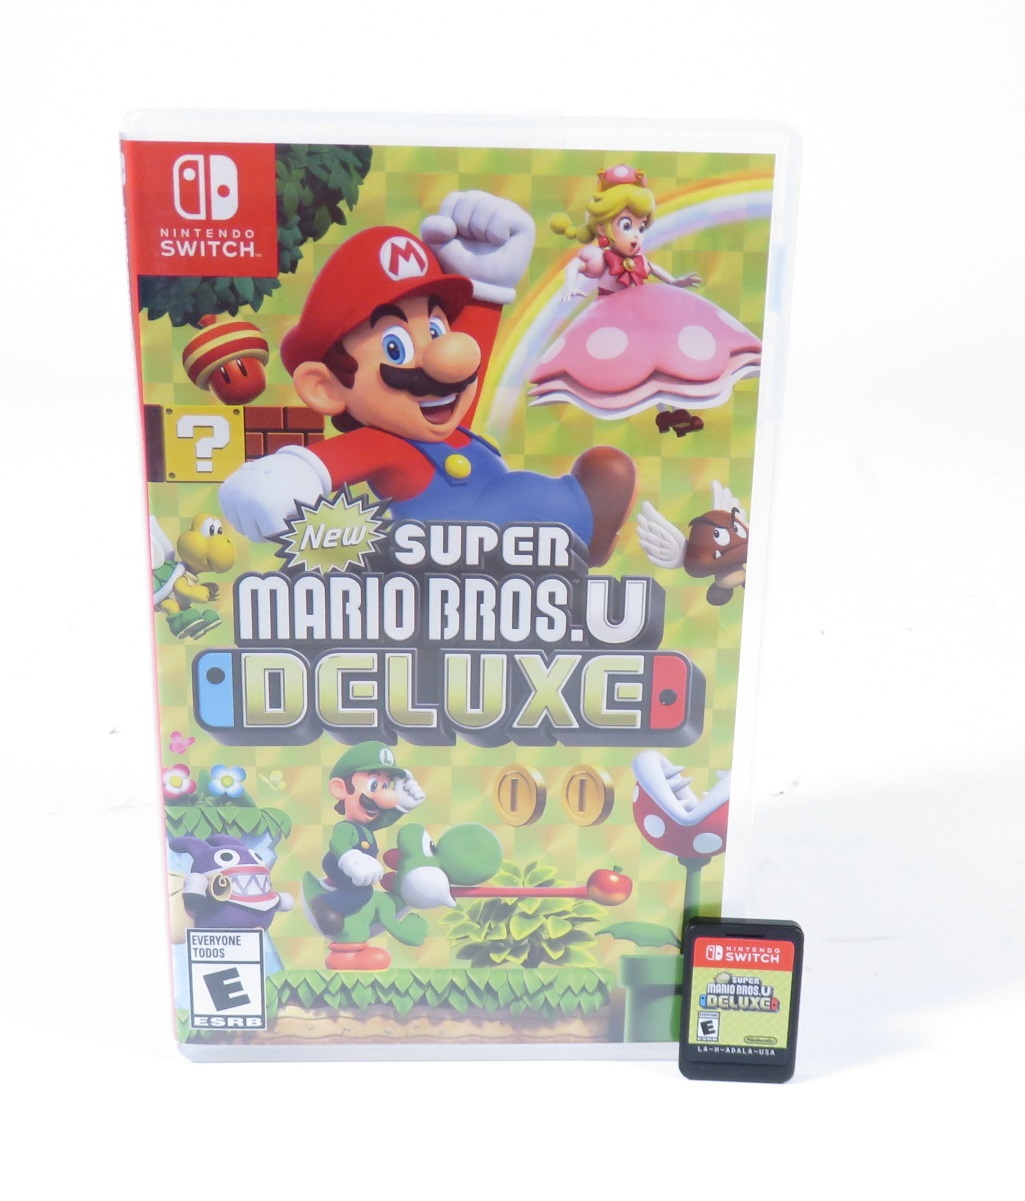 New Super Mario Bros U Deluxe Video Game for the Nintendo Switch